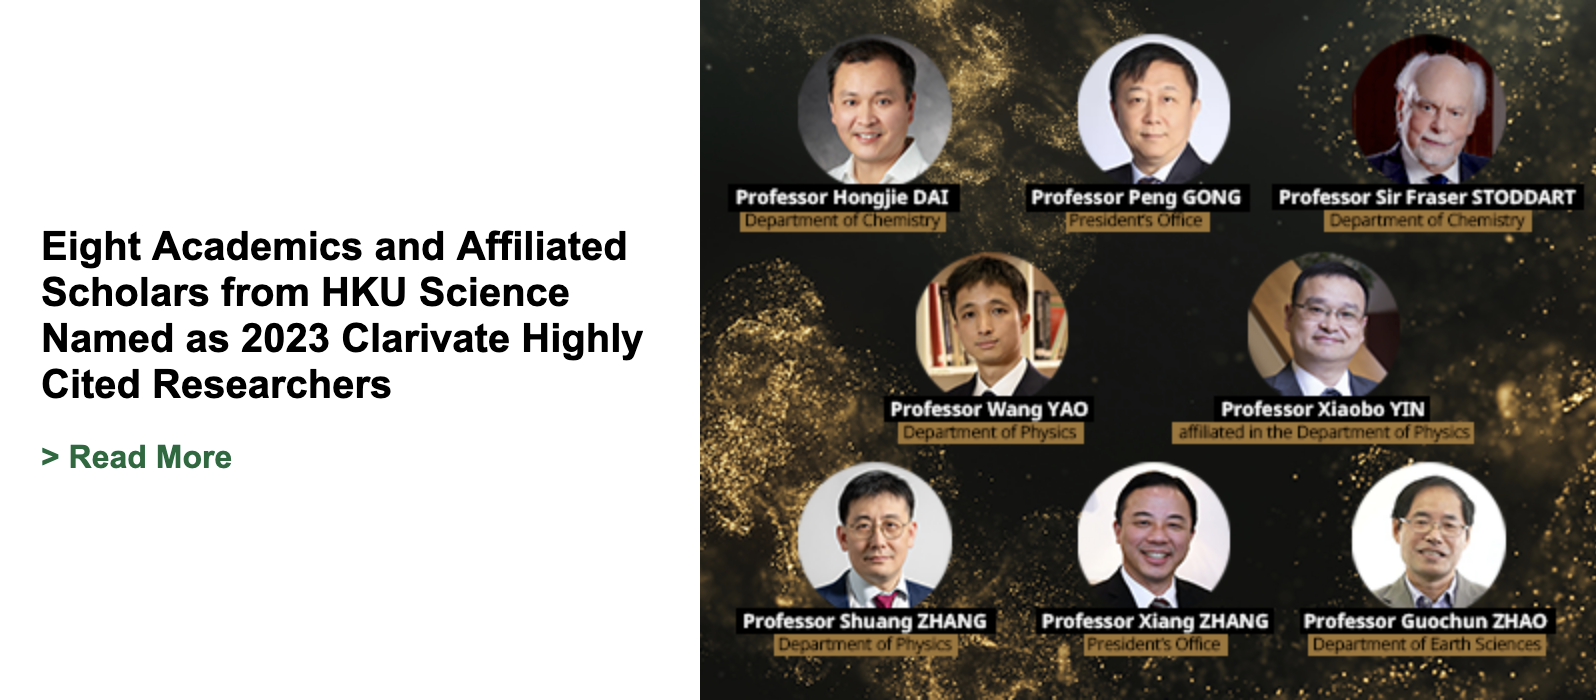 Academics and Affiliated Scholars from HKU Science Named as 2023 Clarivate Highly Cited Researchers